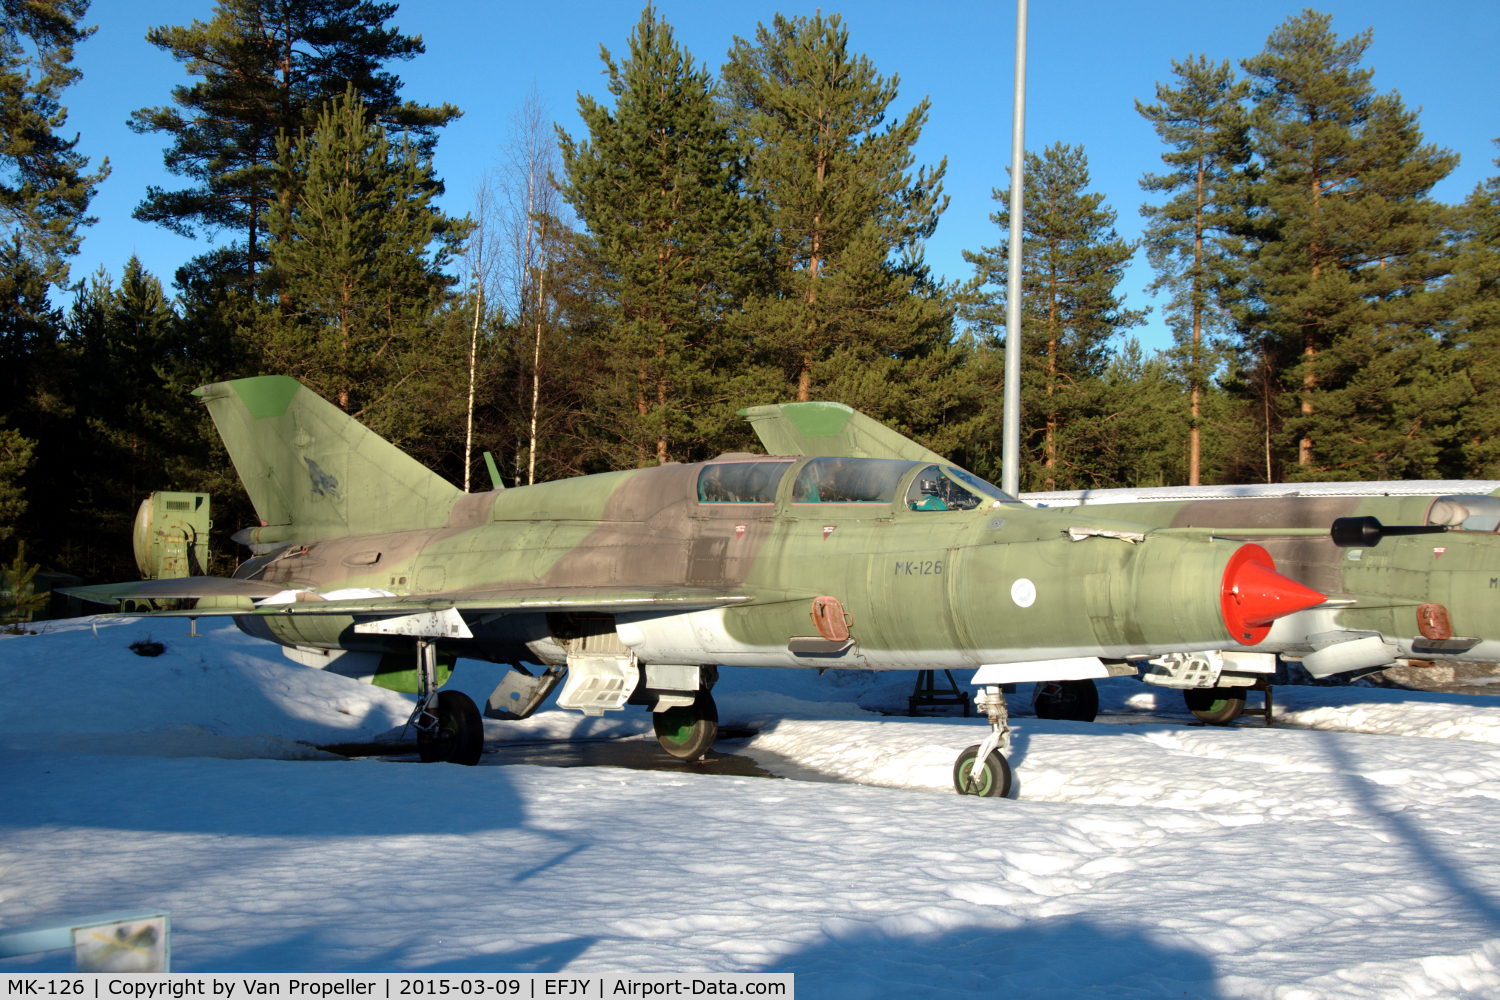 MK-126, Mikoyan-Gurevich MIG-21UM C/N N516999410, MiG-21UM trainer of the Finnish Air Force at the Aviation Museum of Central Finland at Tikkakoski.